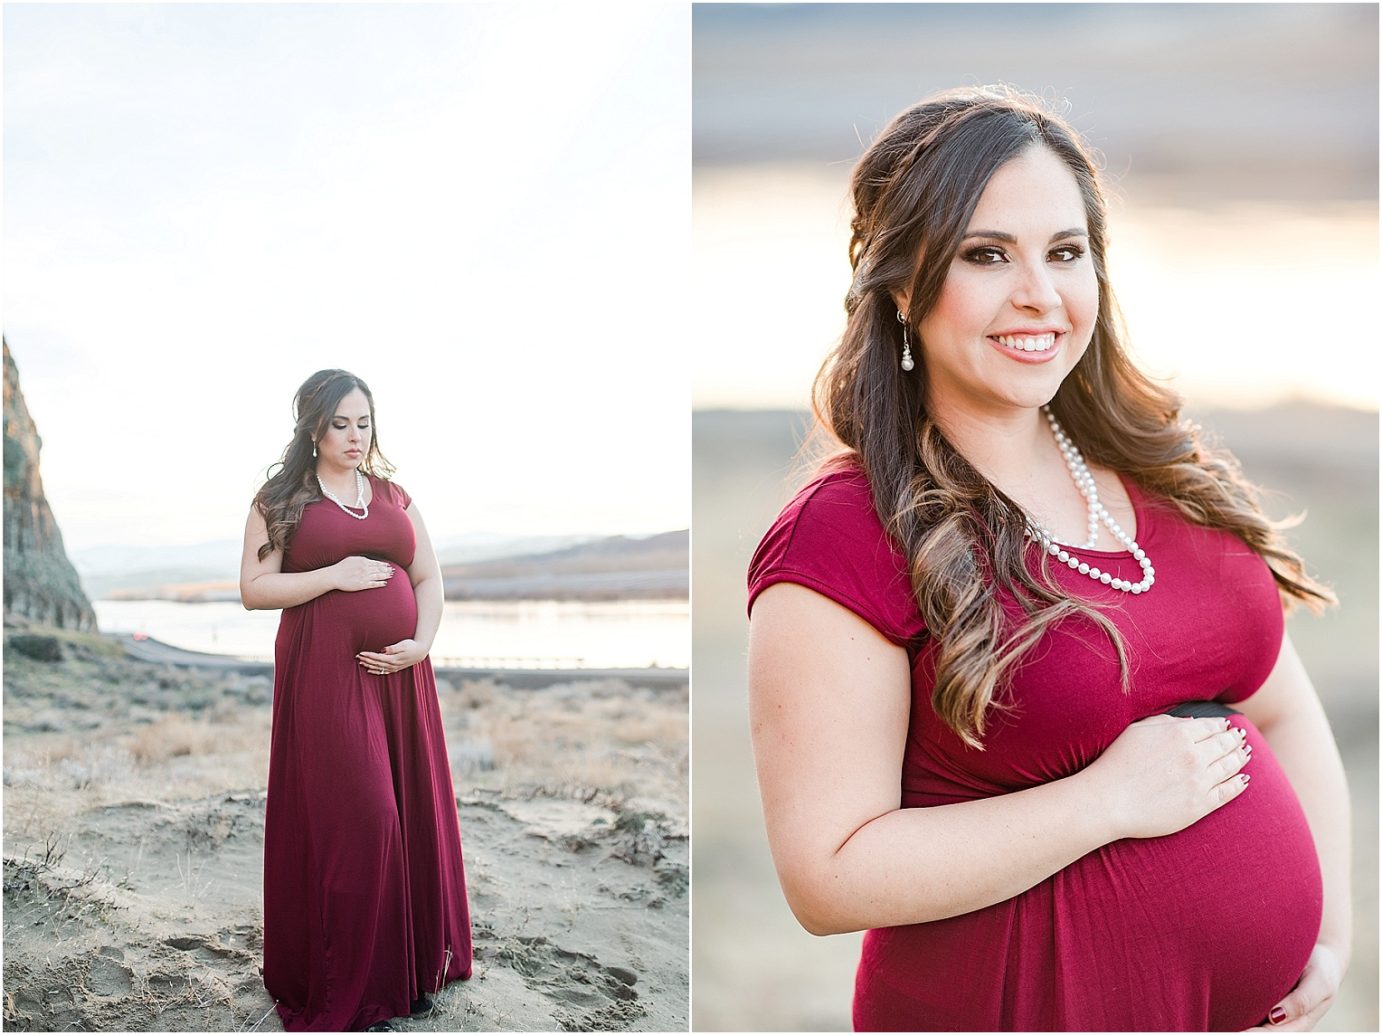 Maternity session on a sand dune in a red dress